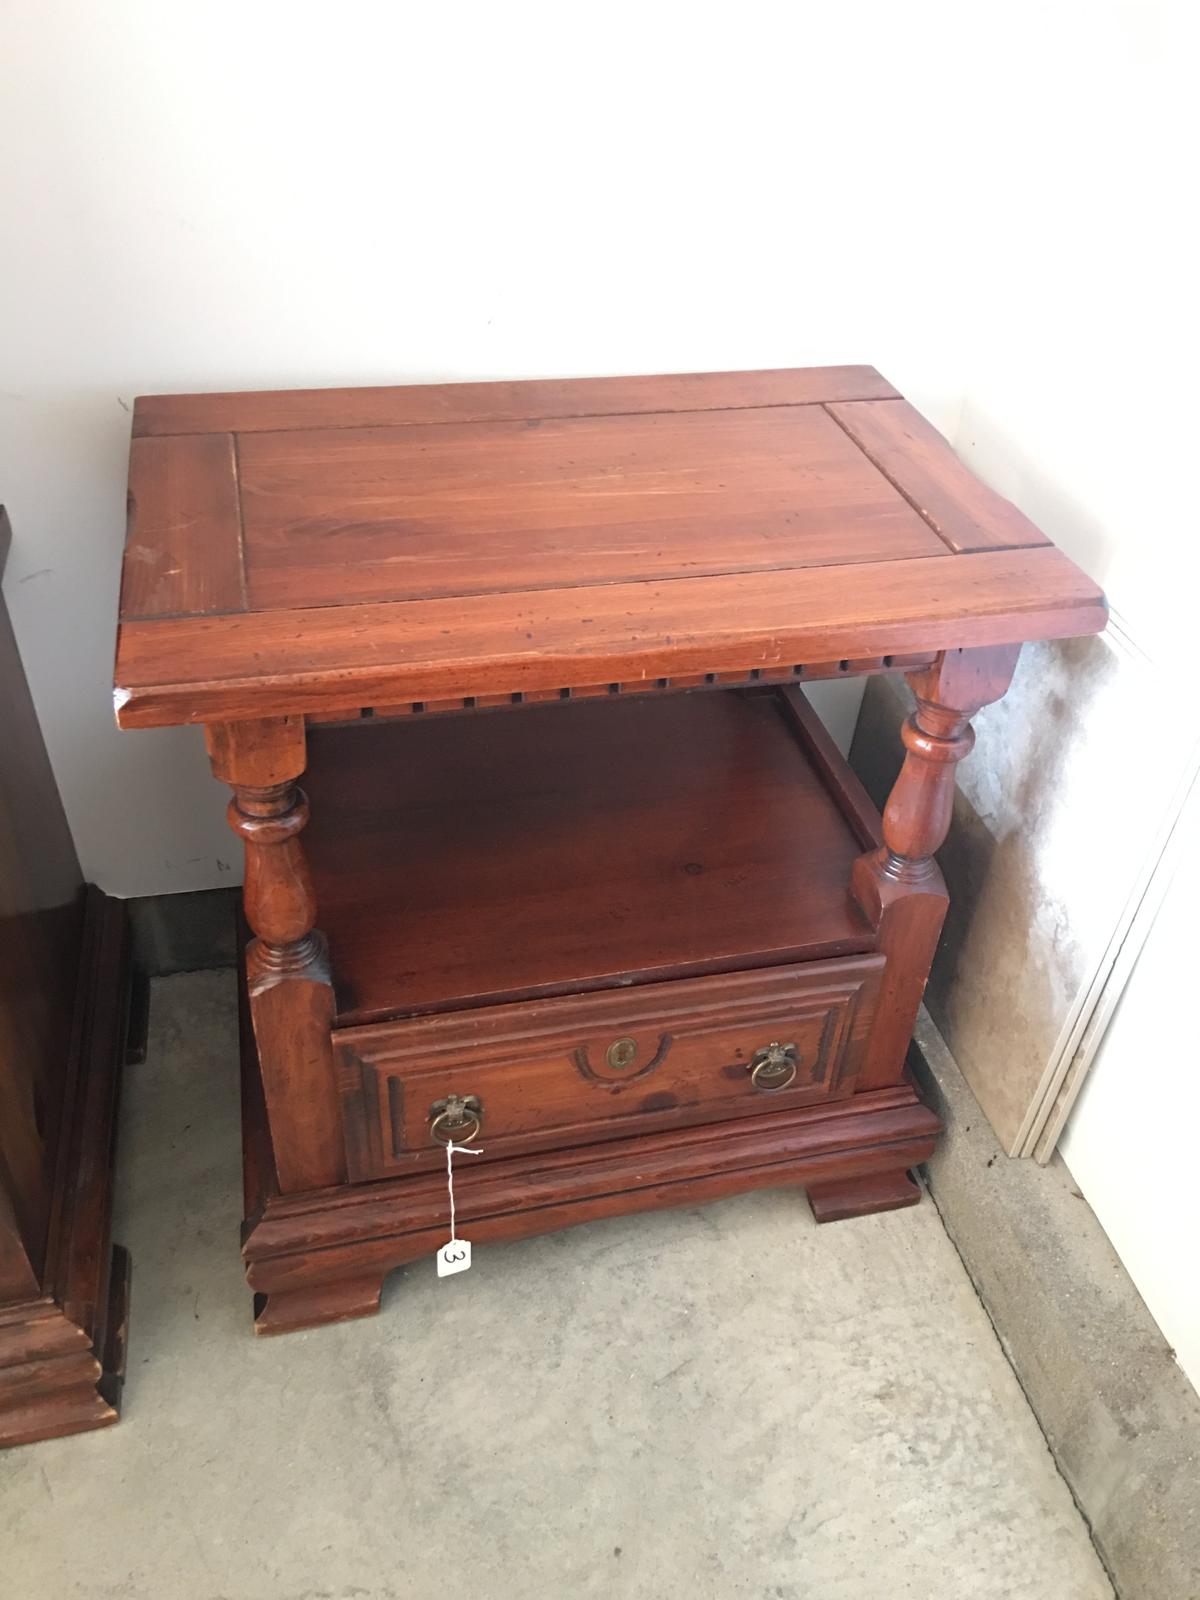 Pine Nightstand that shows wear from years of use